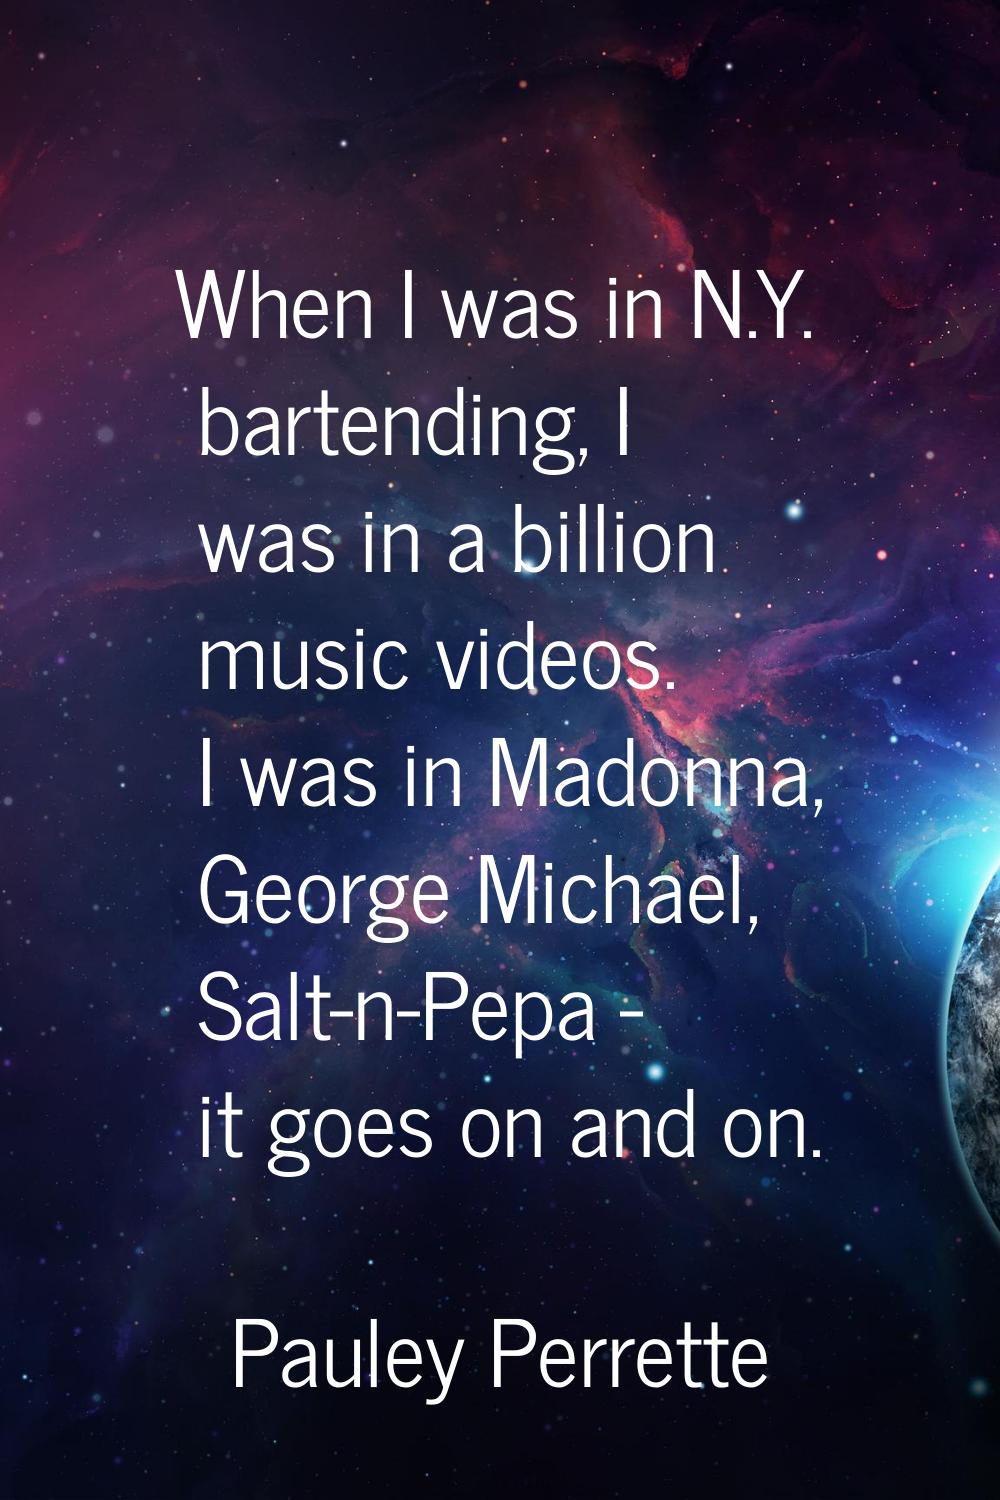 When I was in N.Y. bartending, I was in a billion music videos. I was in Madonna, George Michael, S